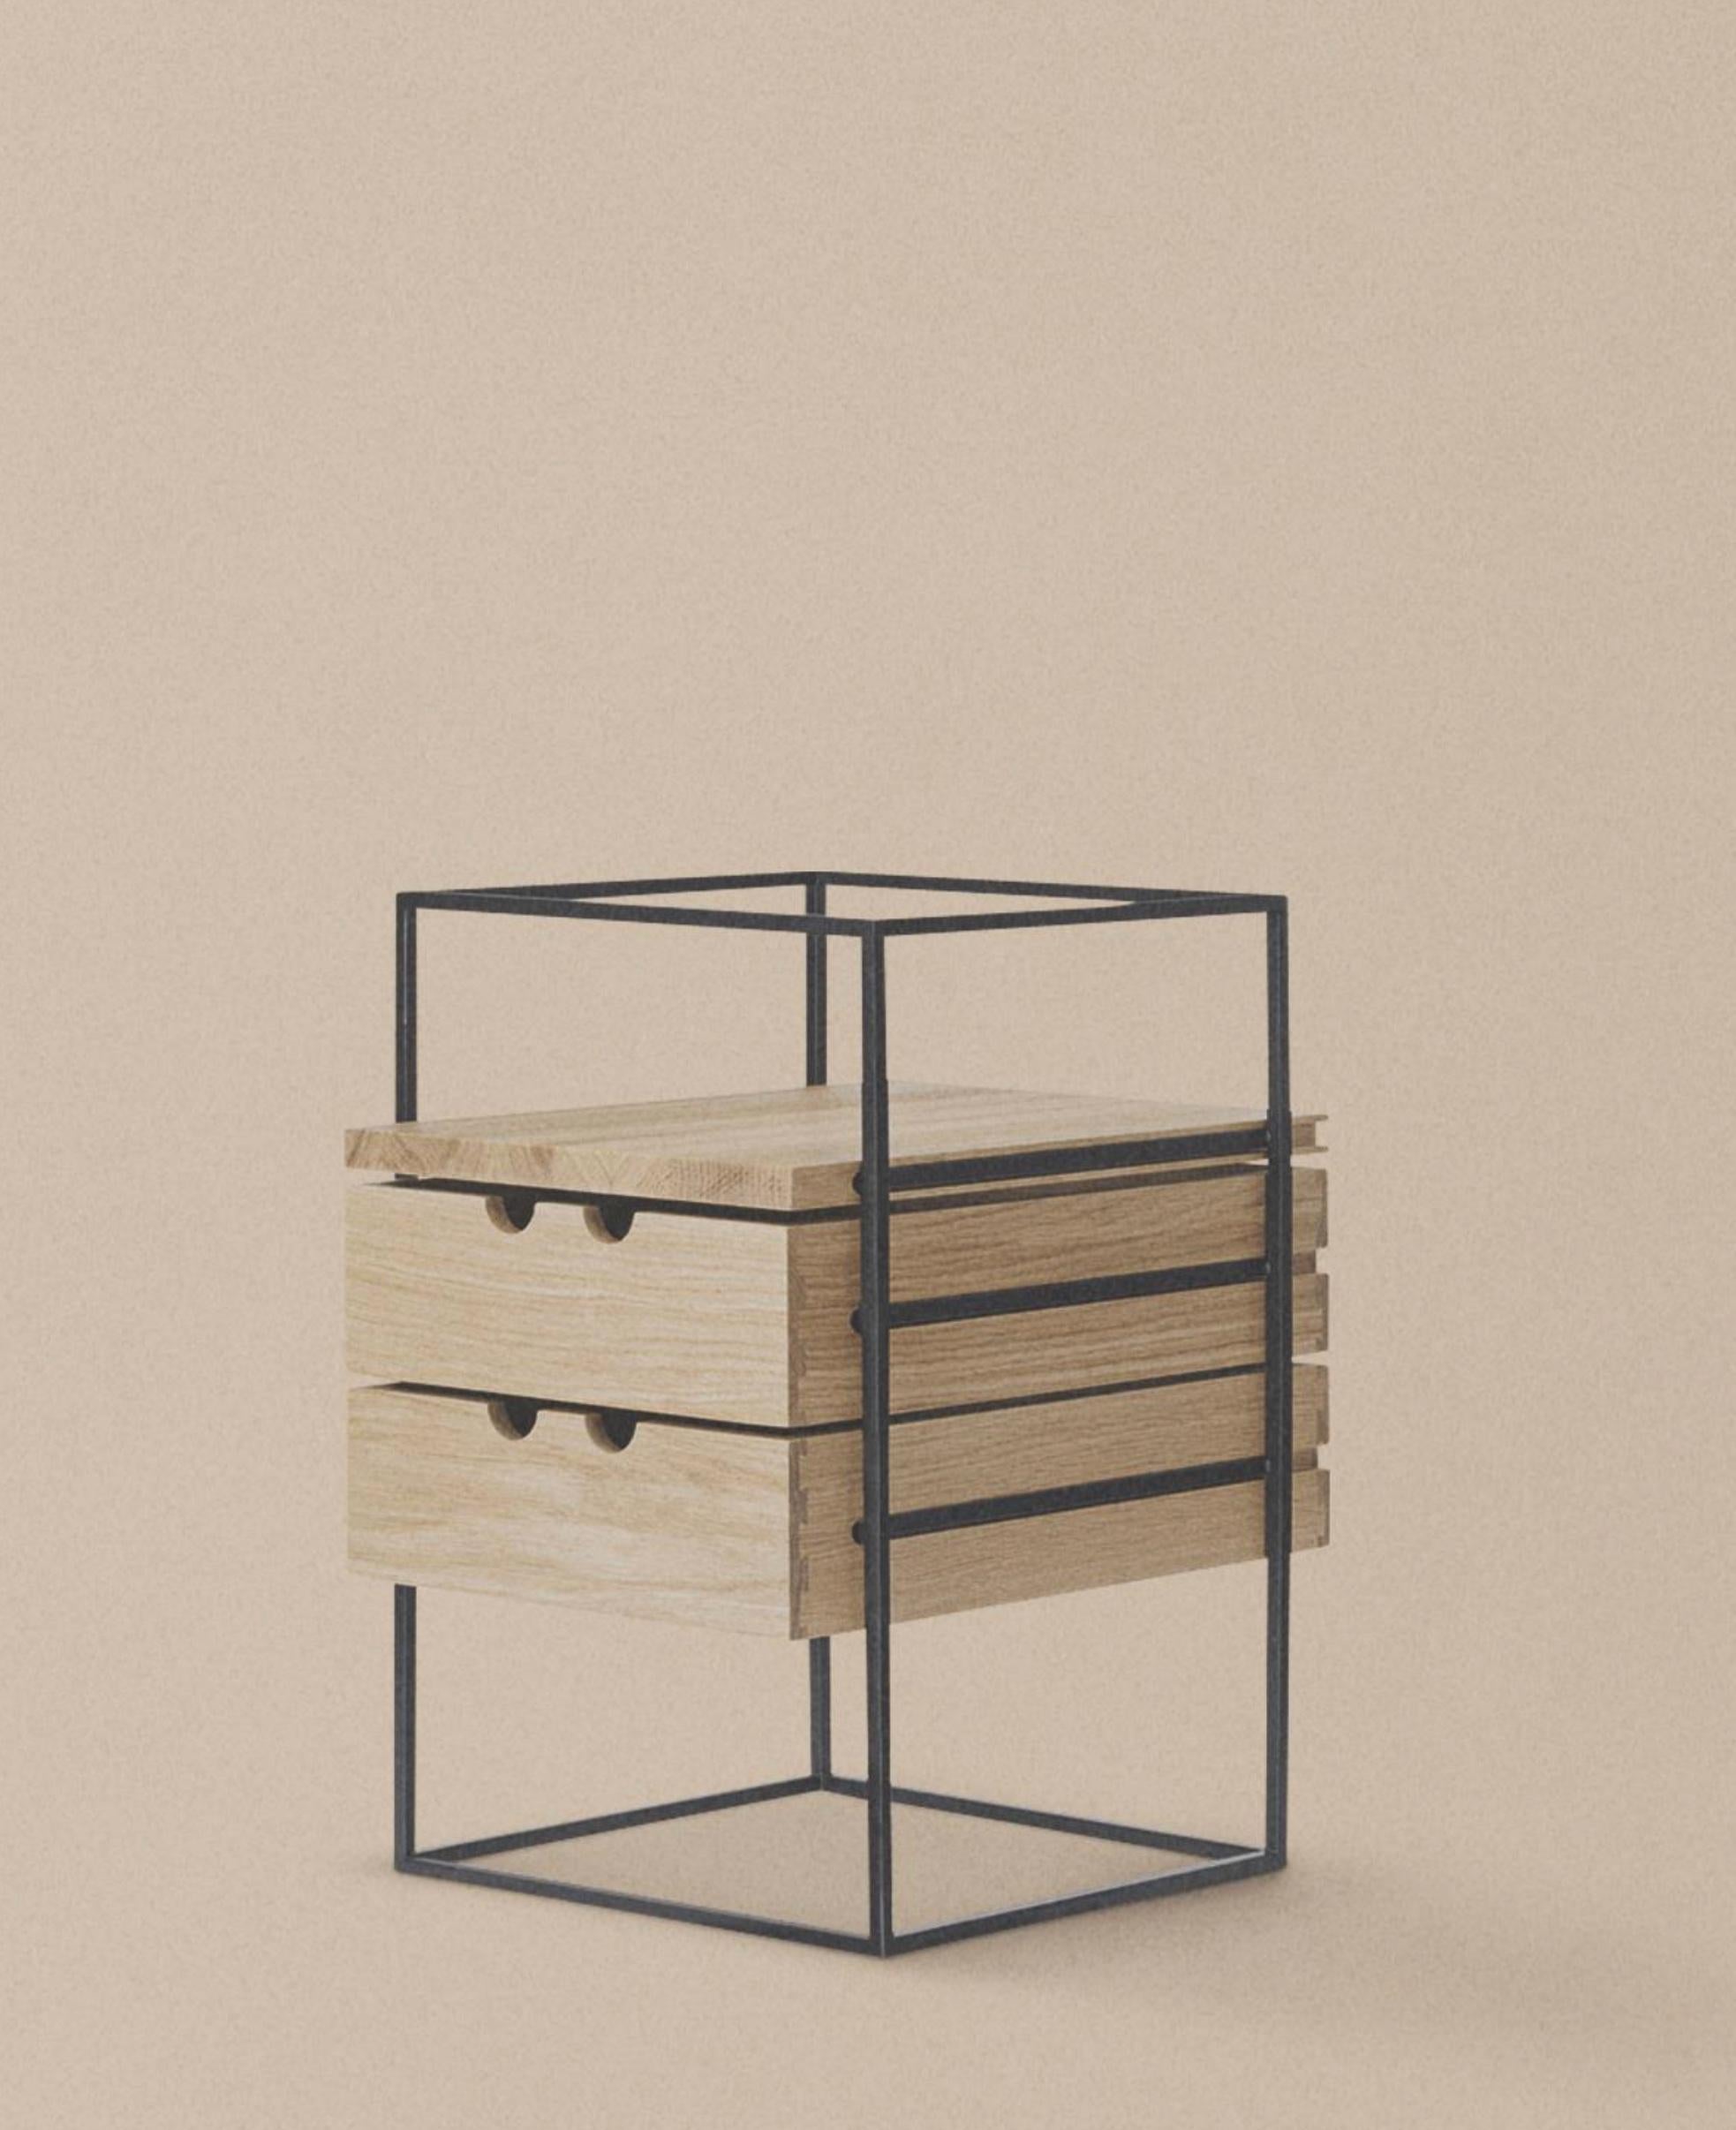 The Desk Organizer is a beautifully simplistic and easy table with slim and straight steel legs, stripped from any details or ornament, leaving only small drawers that can be mounted individually or grouped on either side of the table. 

The Desk